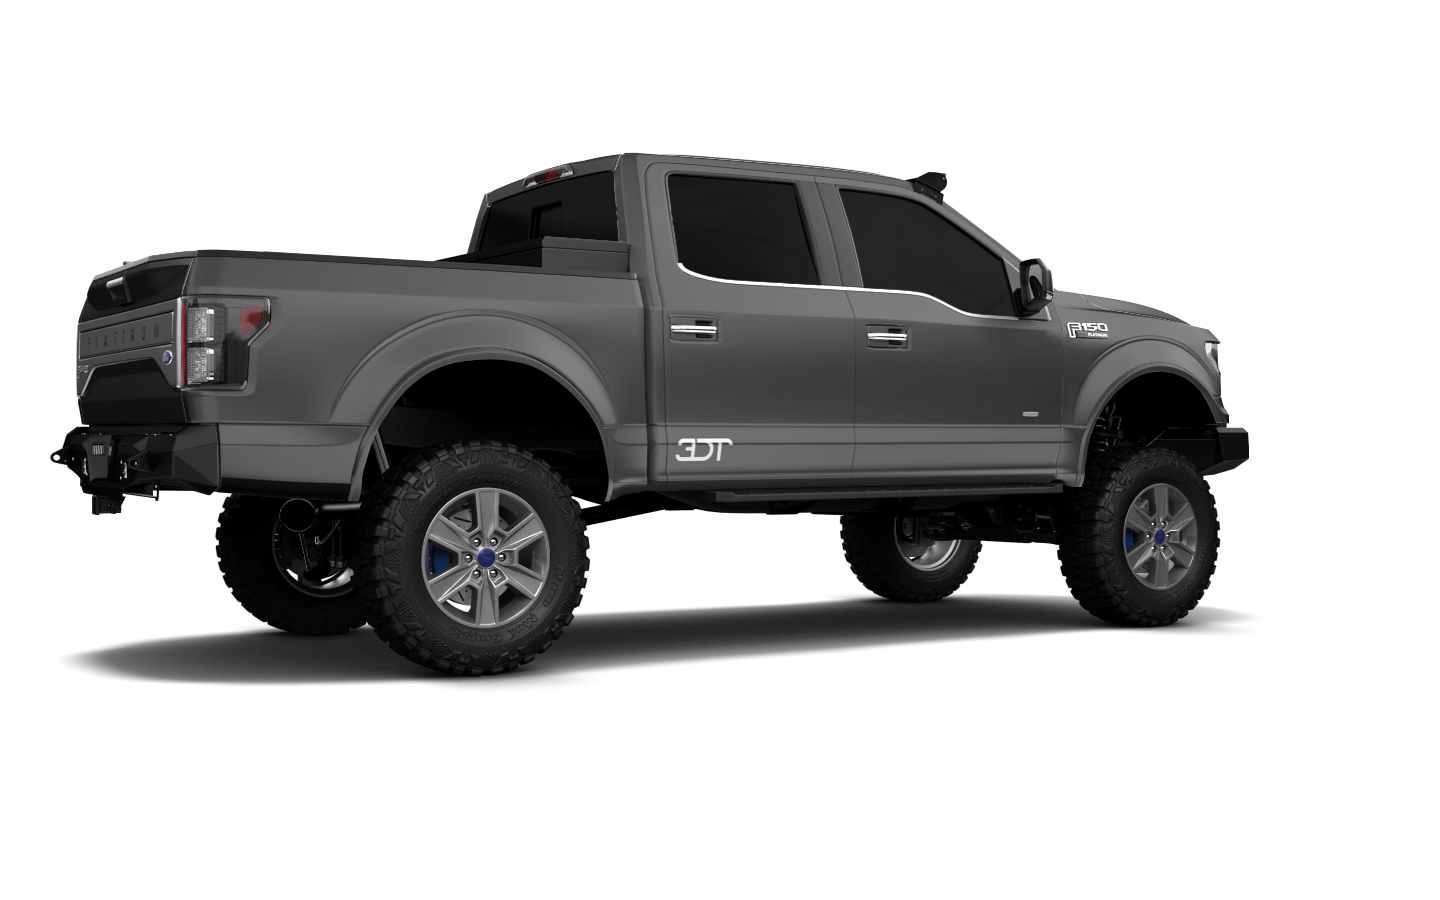 Ford F-150 Truck 2015 tuning